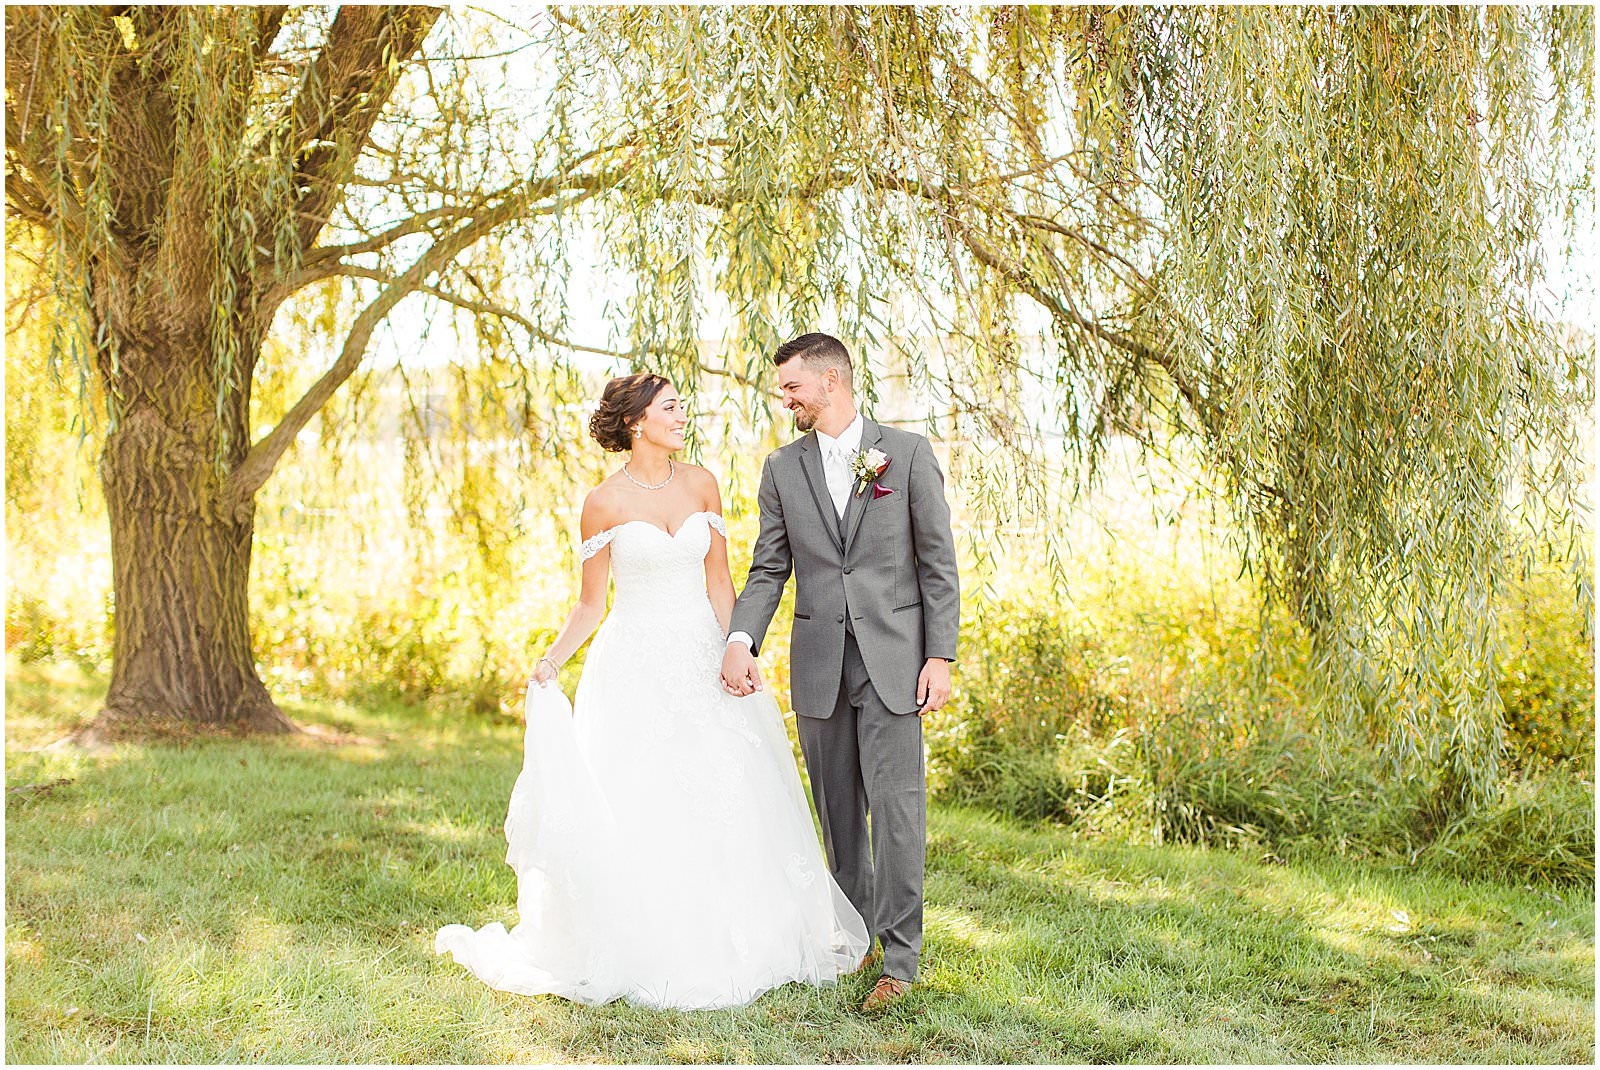 A Stunning Fall Wedding in Indianapolis, IN |. Sally and Andrew | Bret and Brandie Photography 0069.jpg